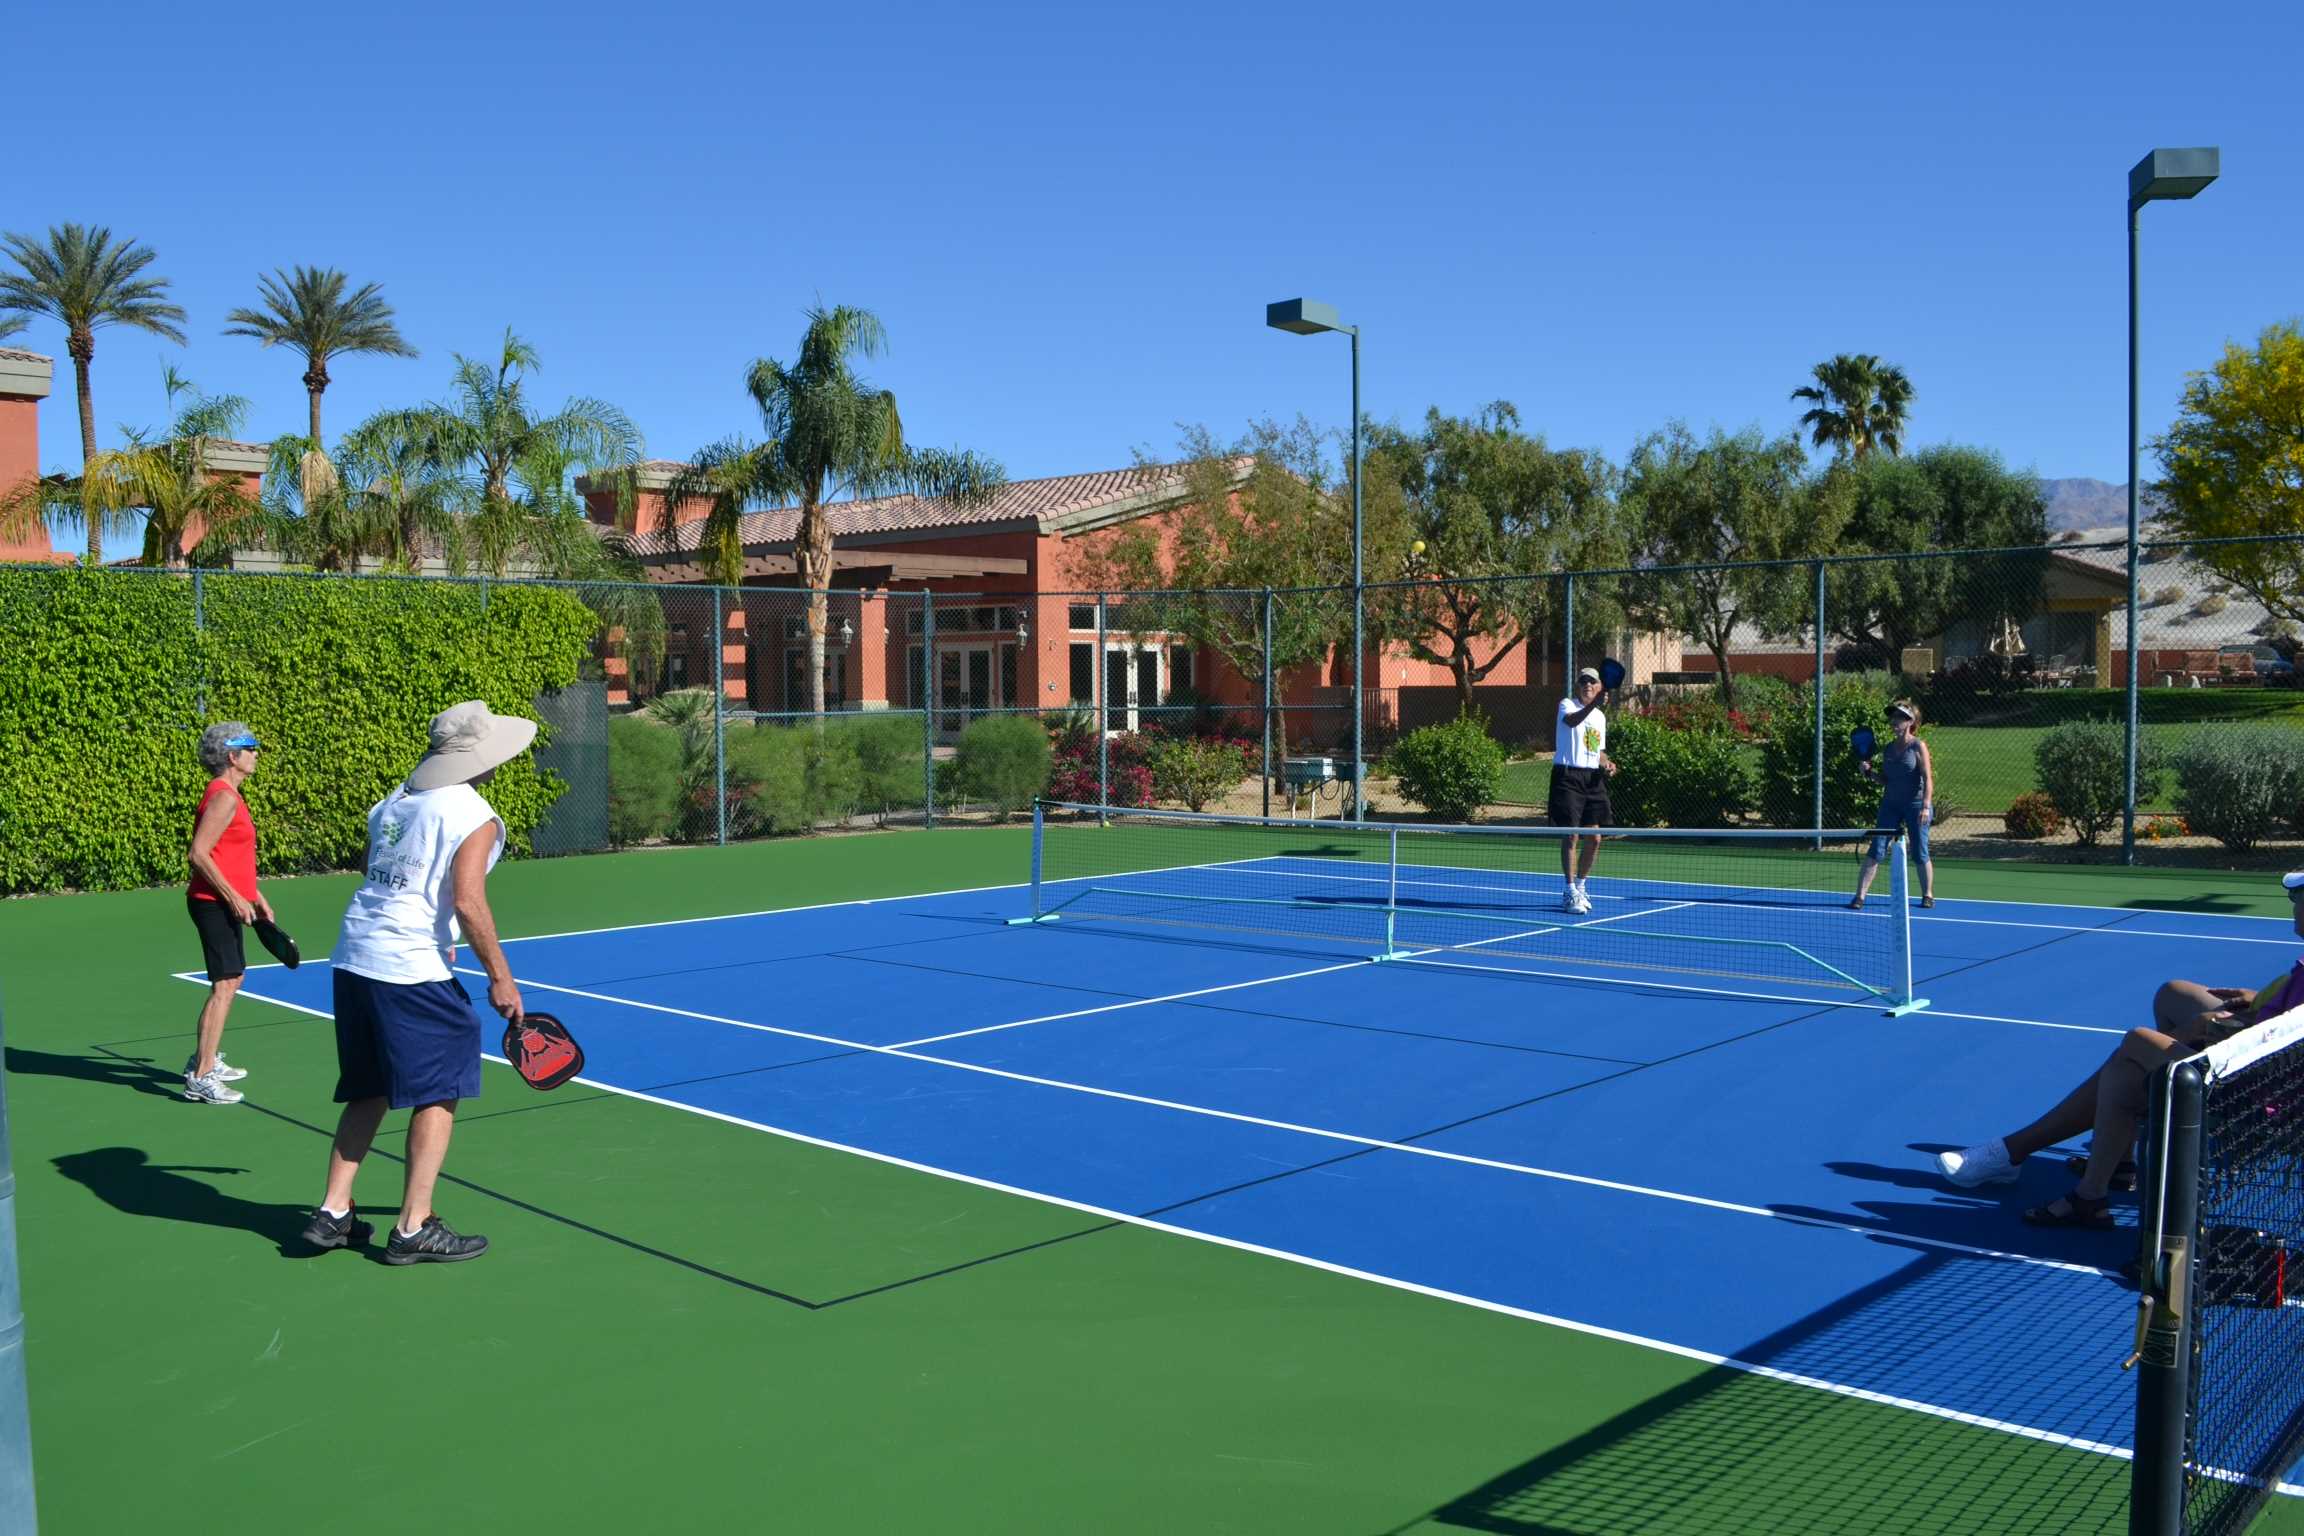 How Much To Build A Tennis Court In Your Backyard